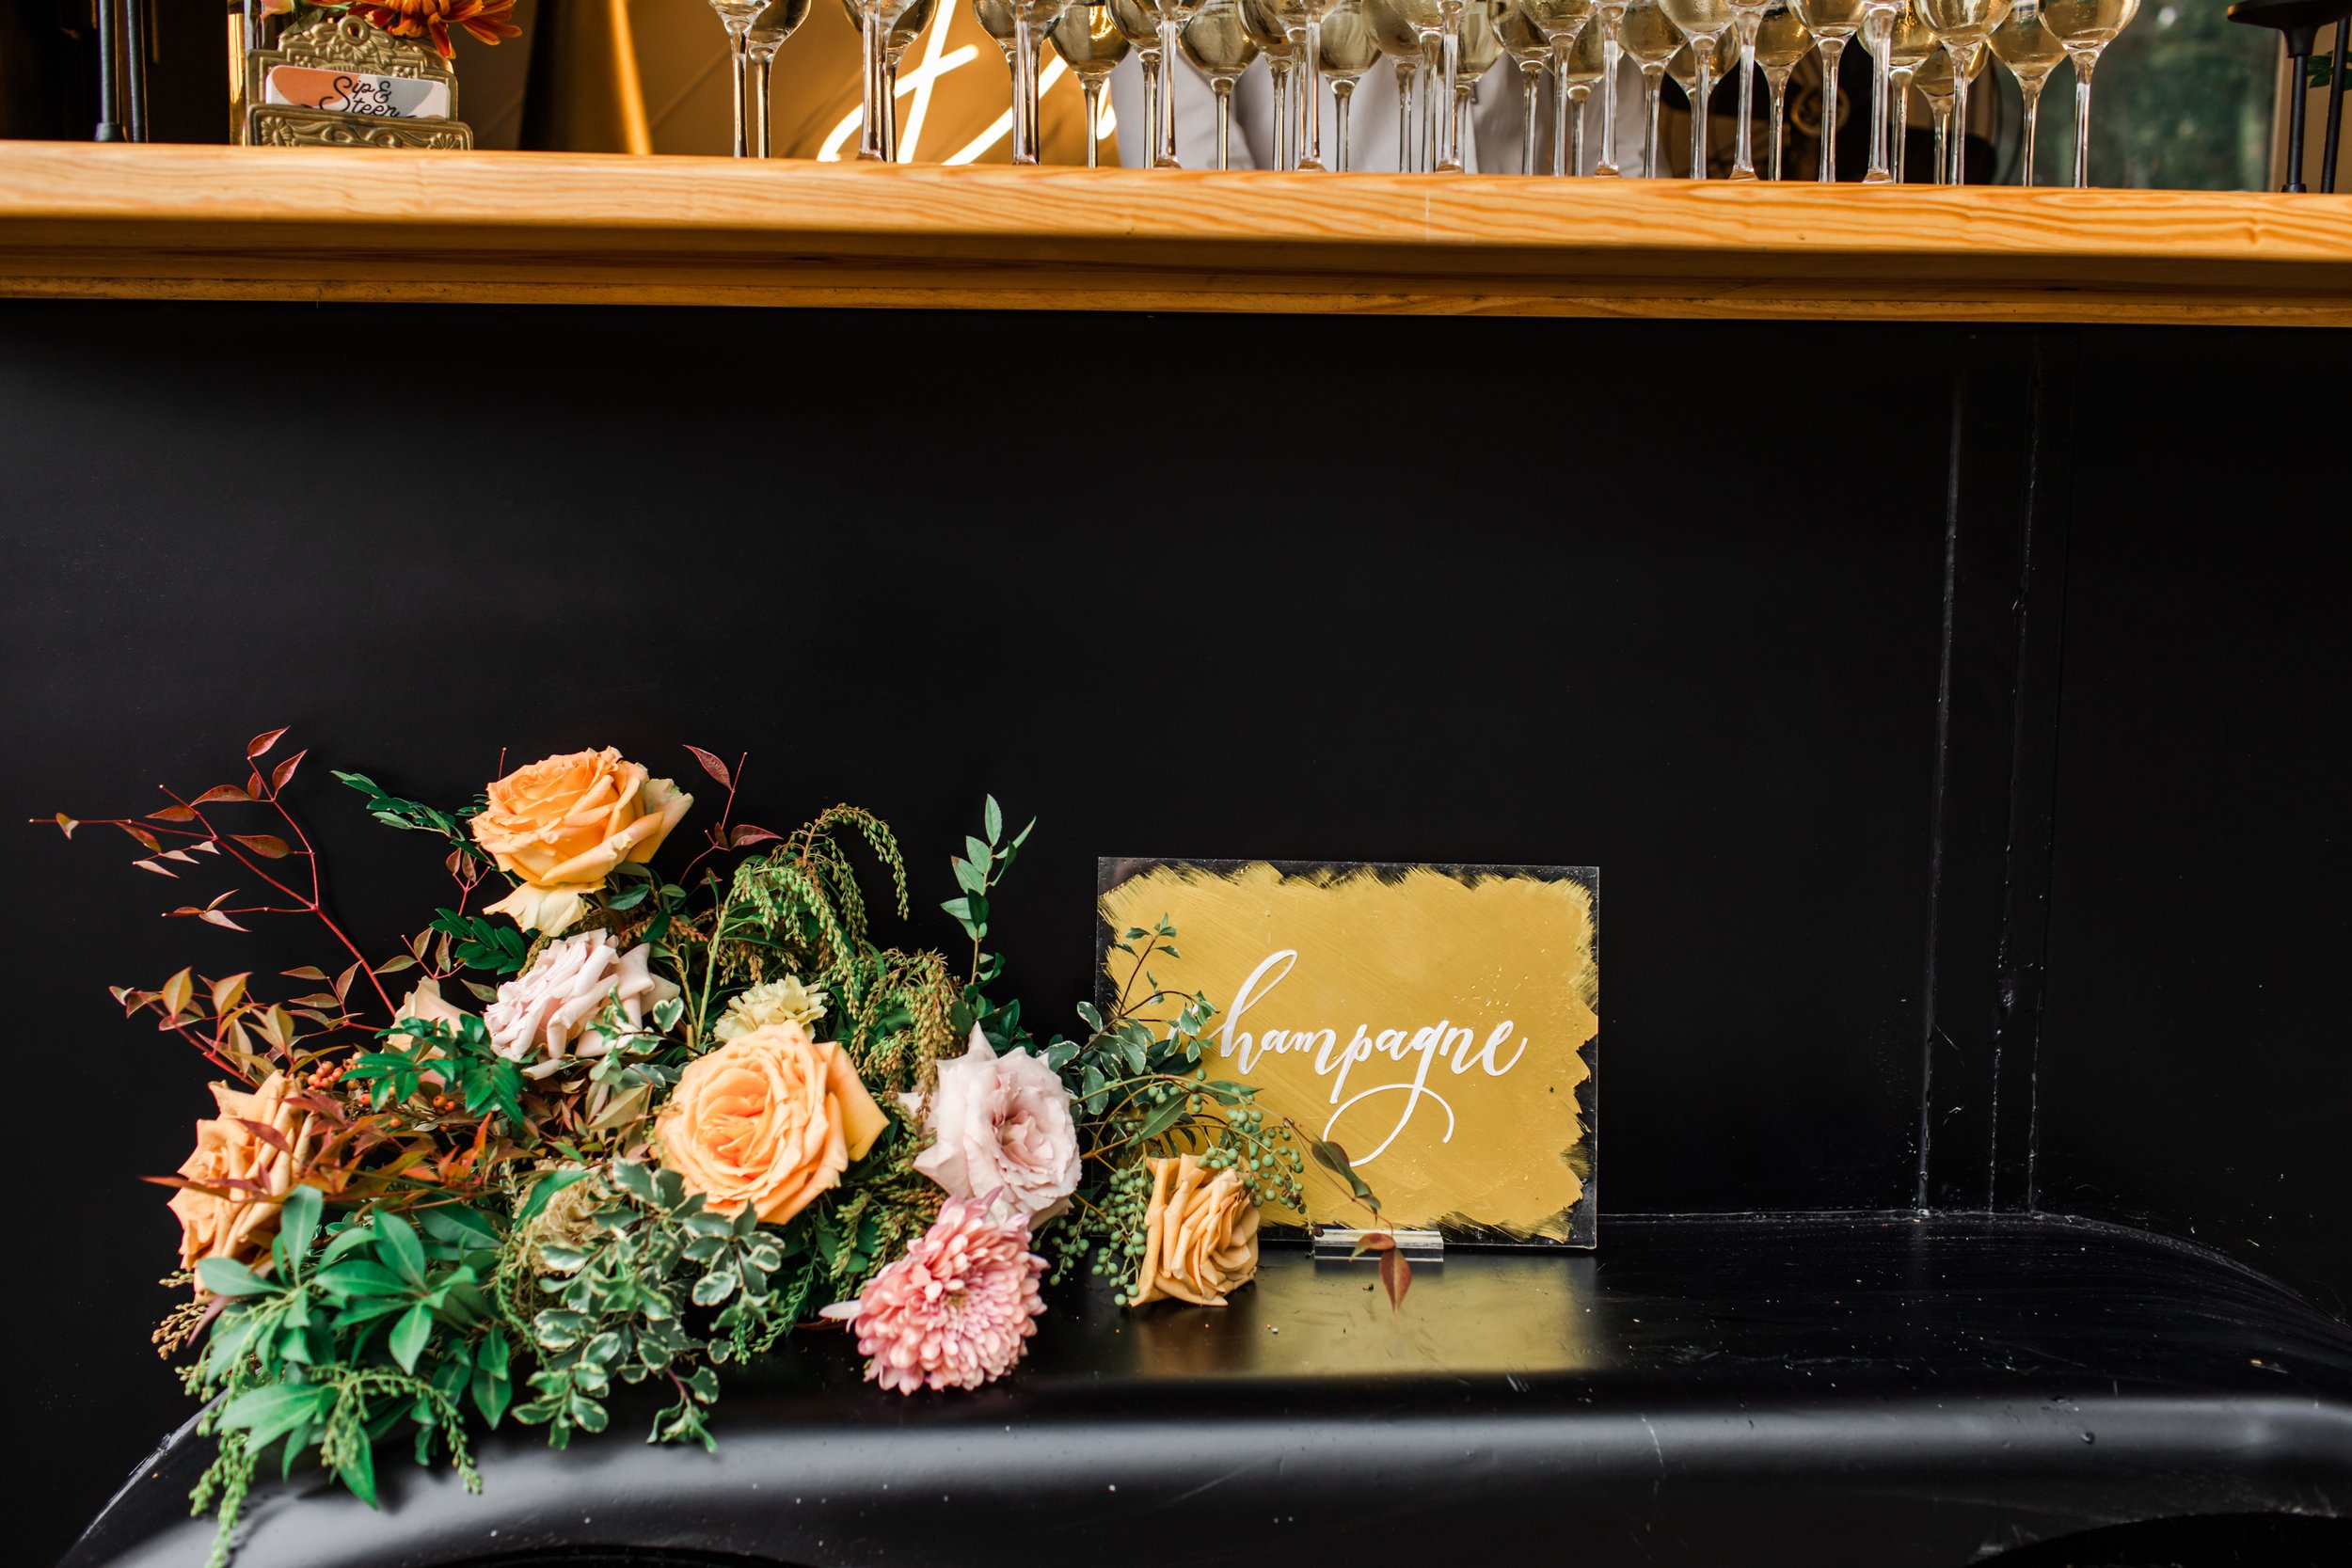 Elegant accents of fall florals, including roses, dahlias, and fall greenery, decorate the reception space of this autumnal wedding. Hues of terra cotta, rose gold, yellow, copper, and dusty pink. Designed by Rosemary and Finch in Nashville, TN.